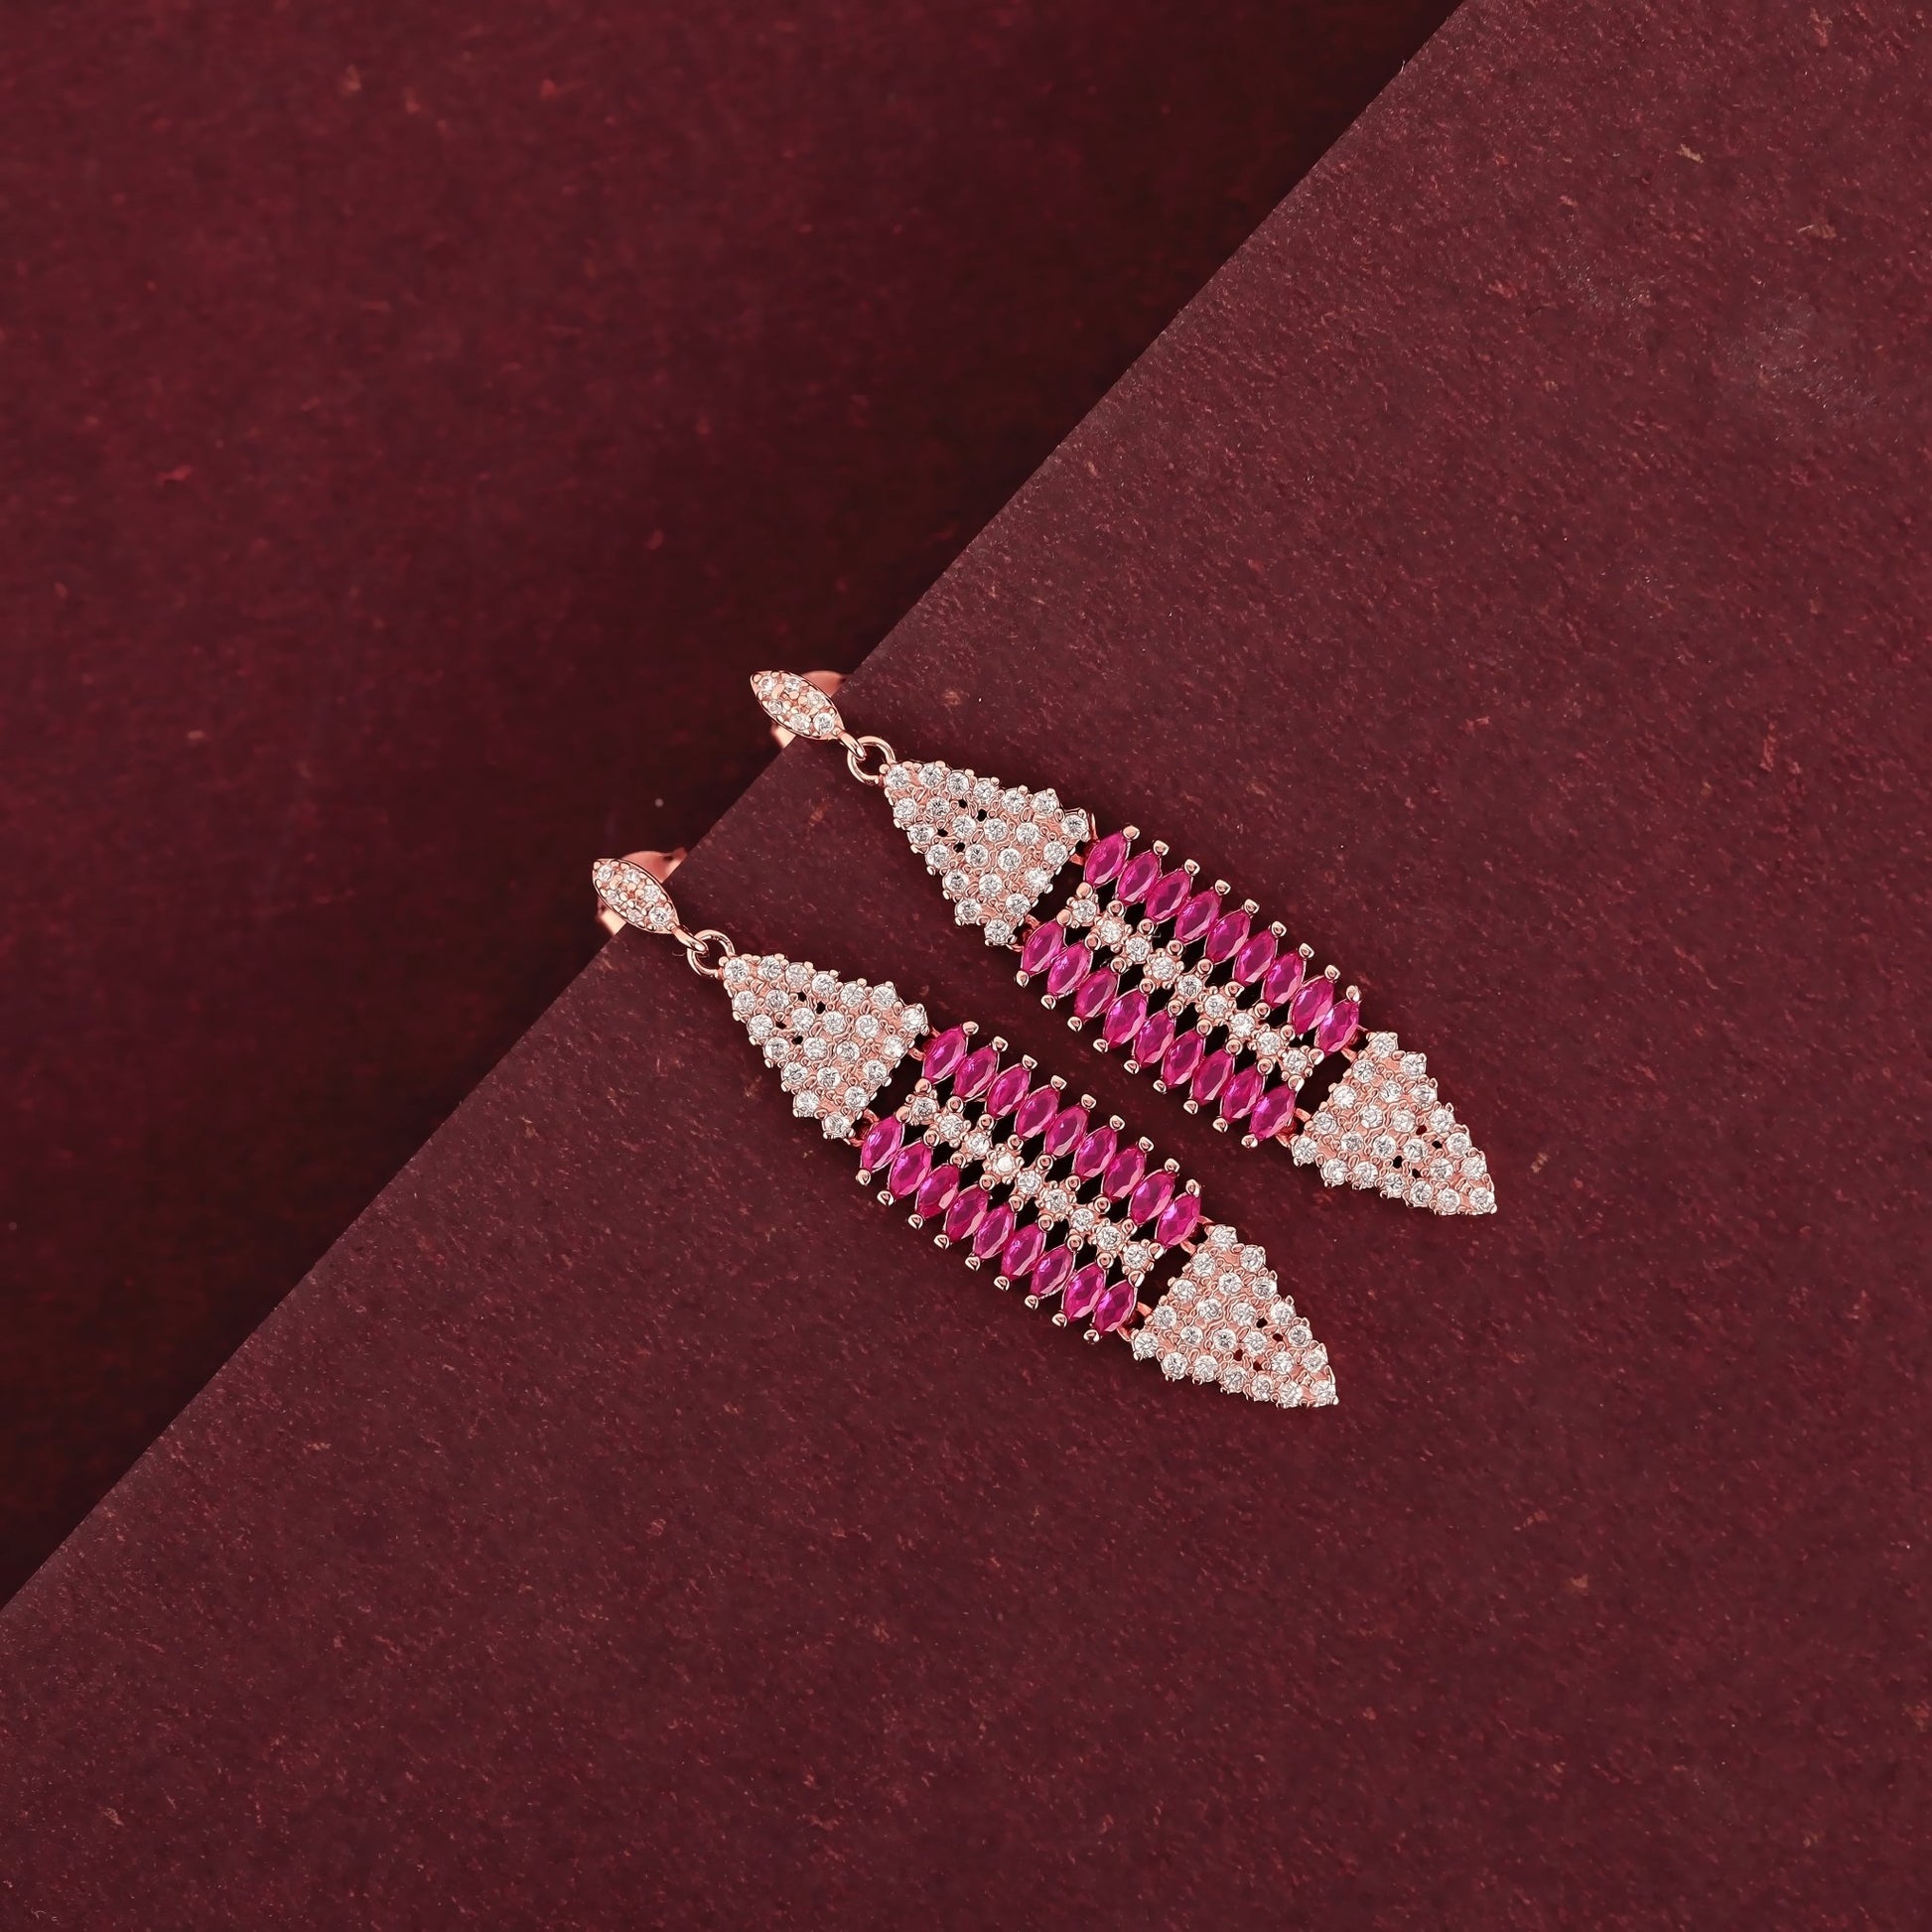 Radiant Ruby Cascade: Rose Gold-Plated Dangling Earrings with Marquis Cut Rubies and CZ Stones - Shining Silver.in